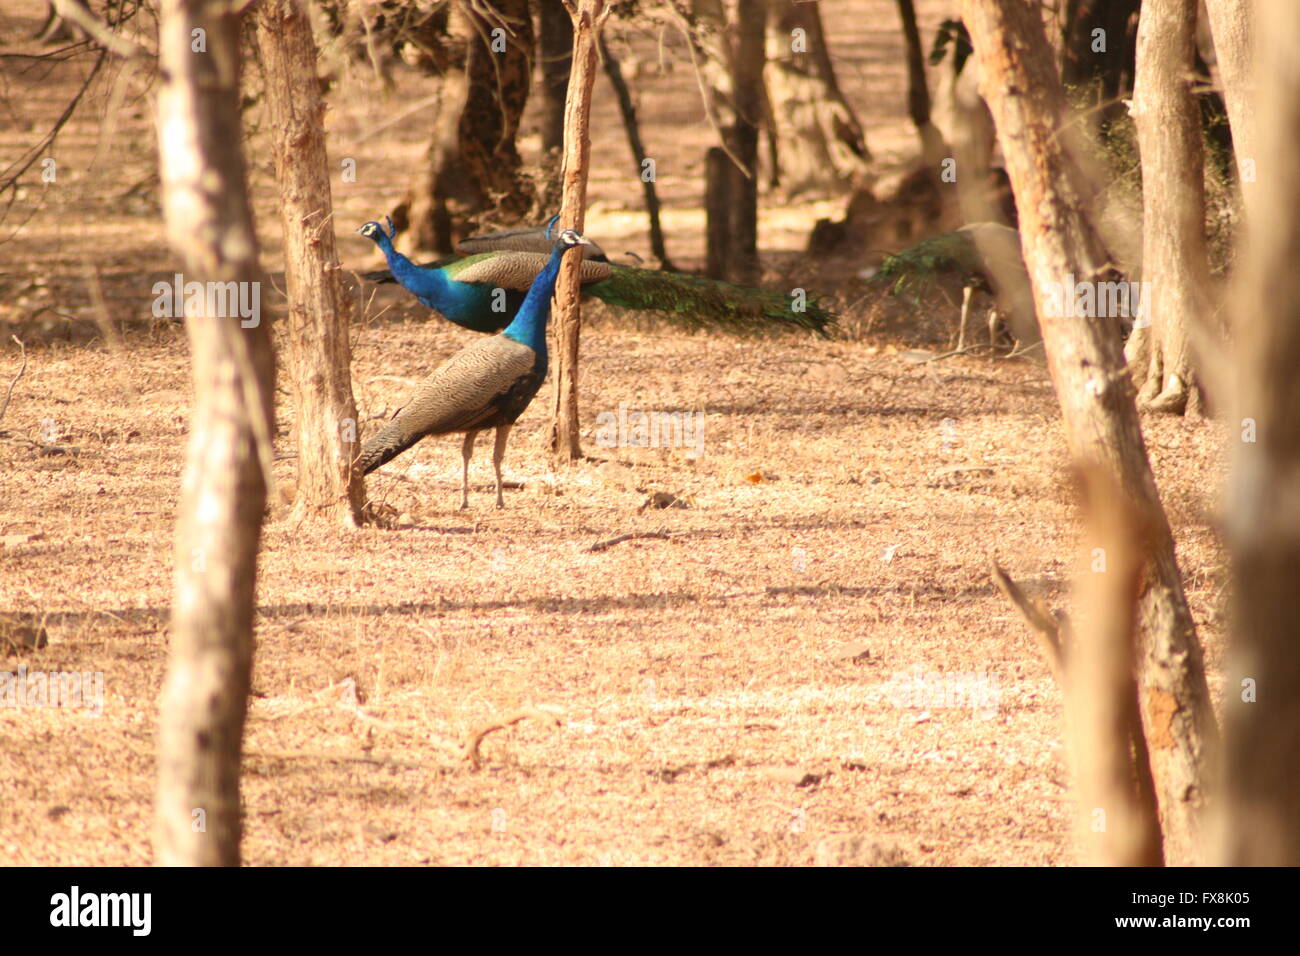 Two peacocks in an Indian forest Stock Photo